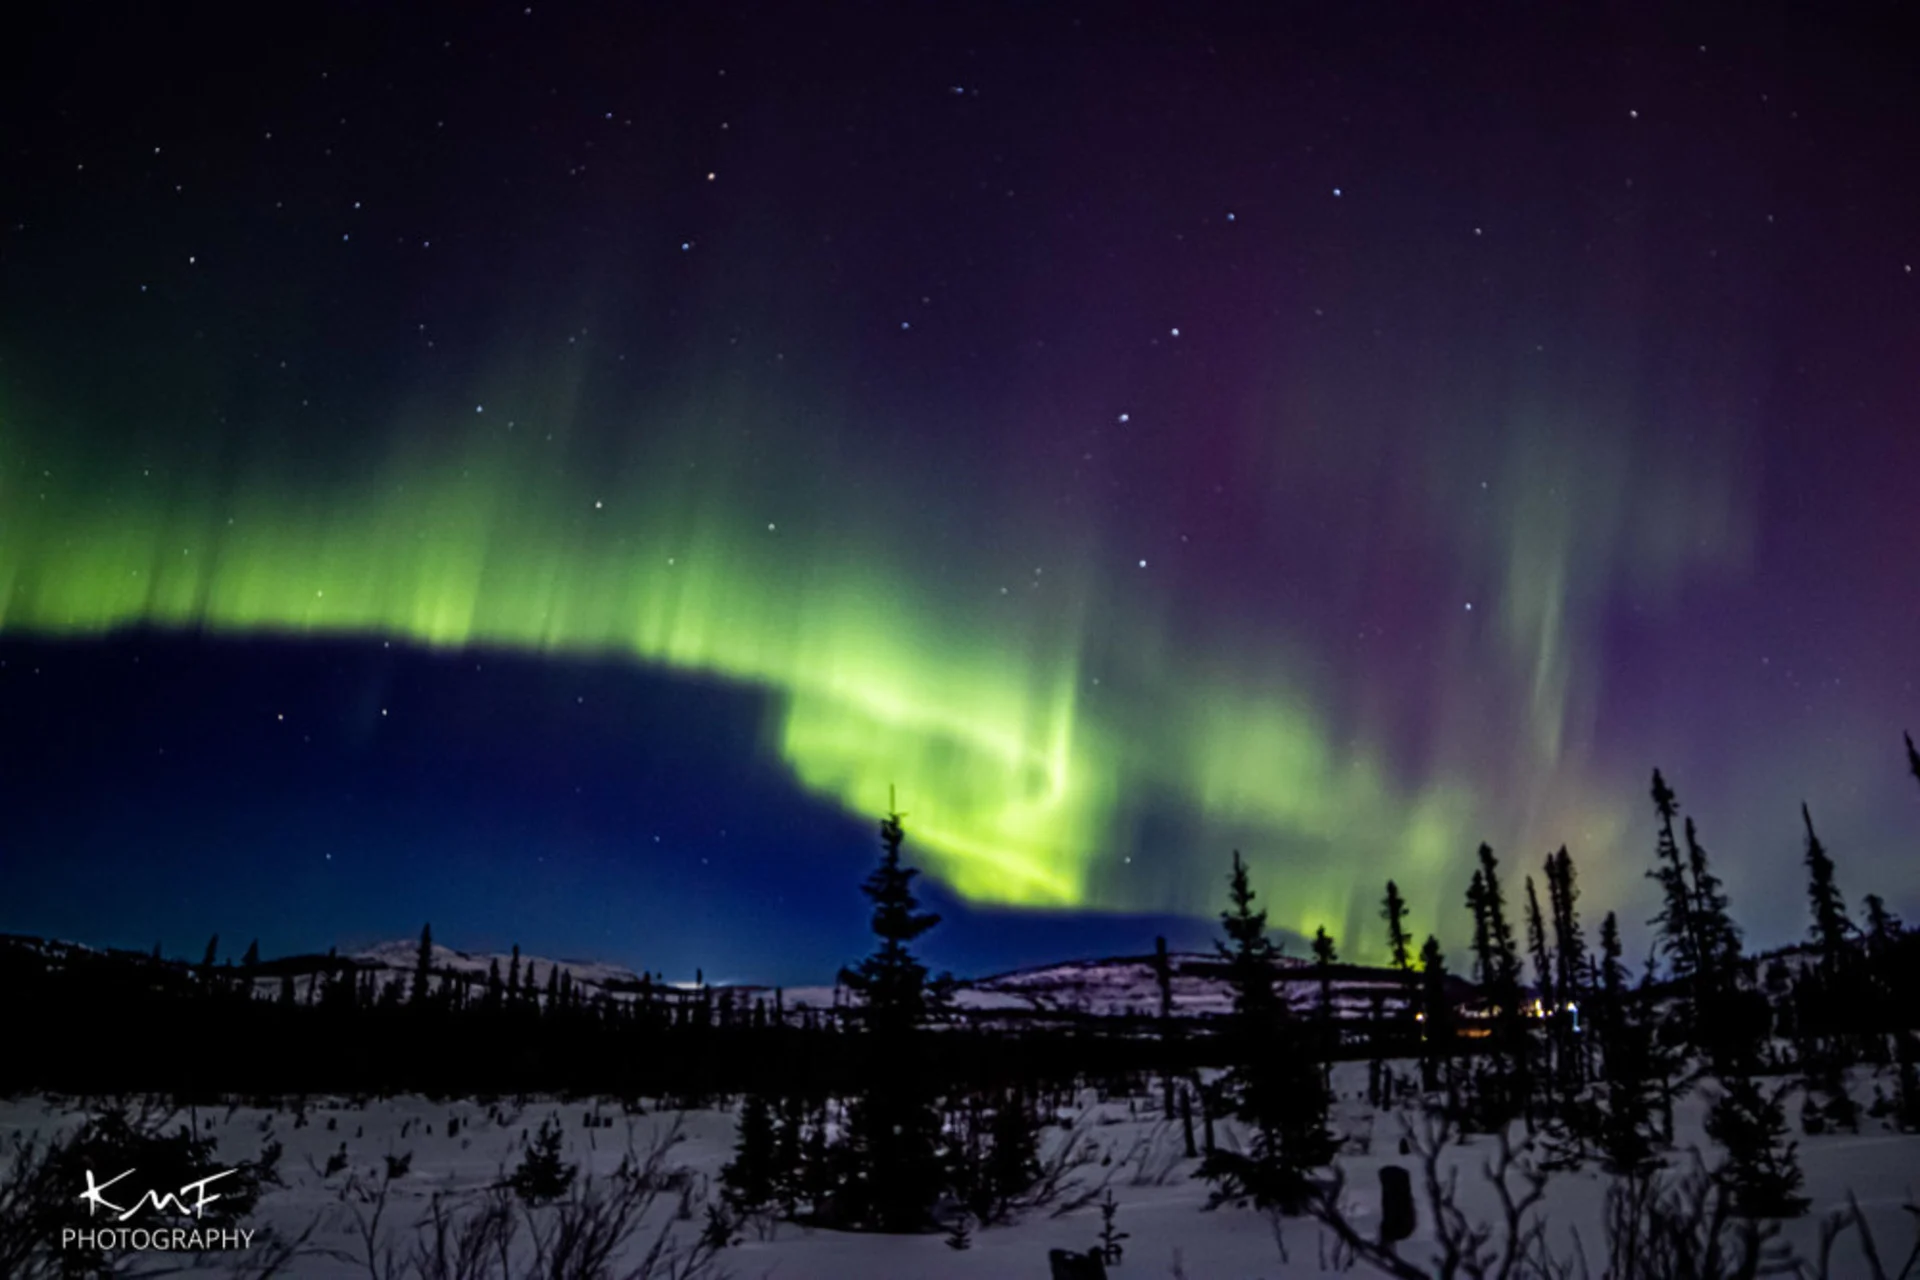 PHOTOS: Vibrant northern lights dance in the night sky across Canada